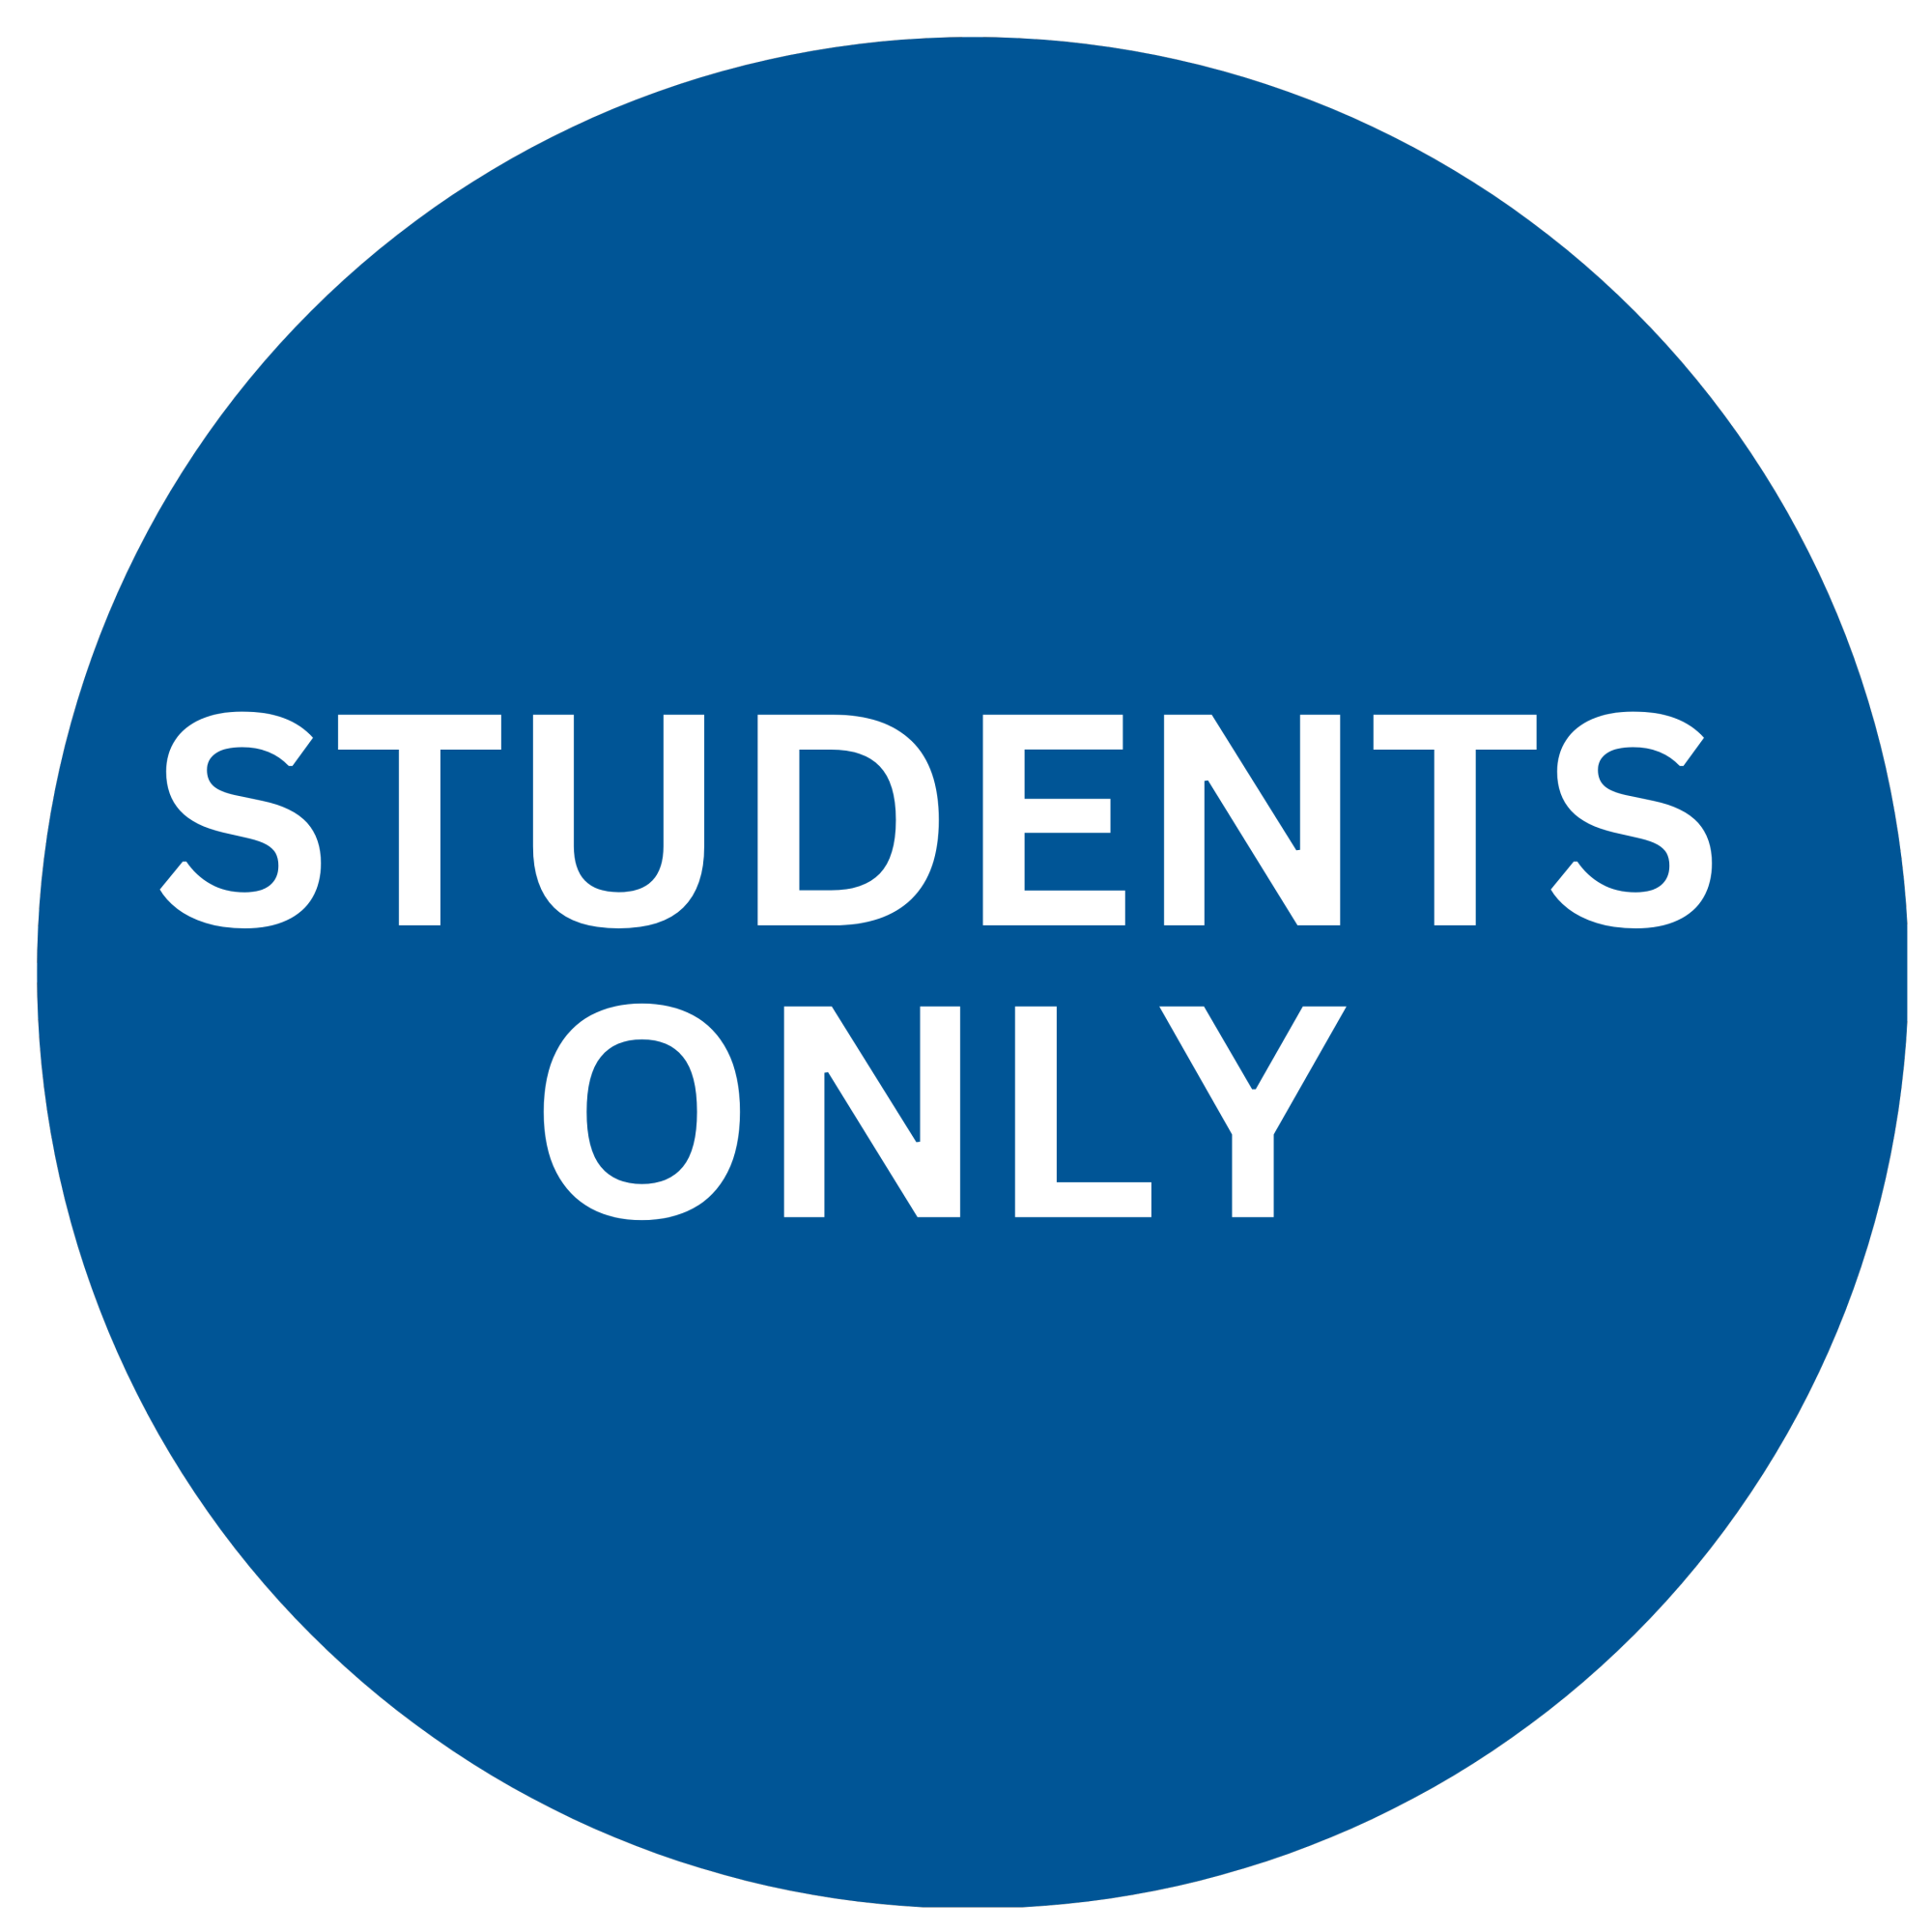 Only students can attend